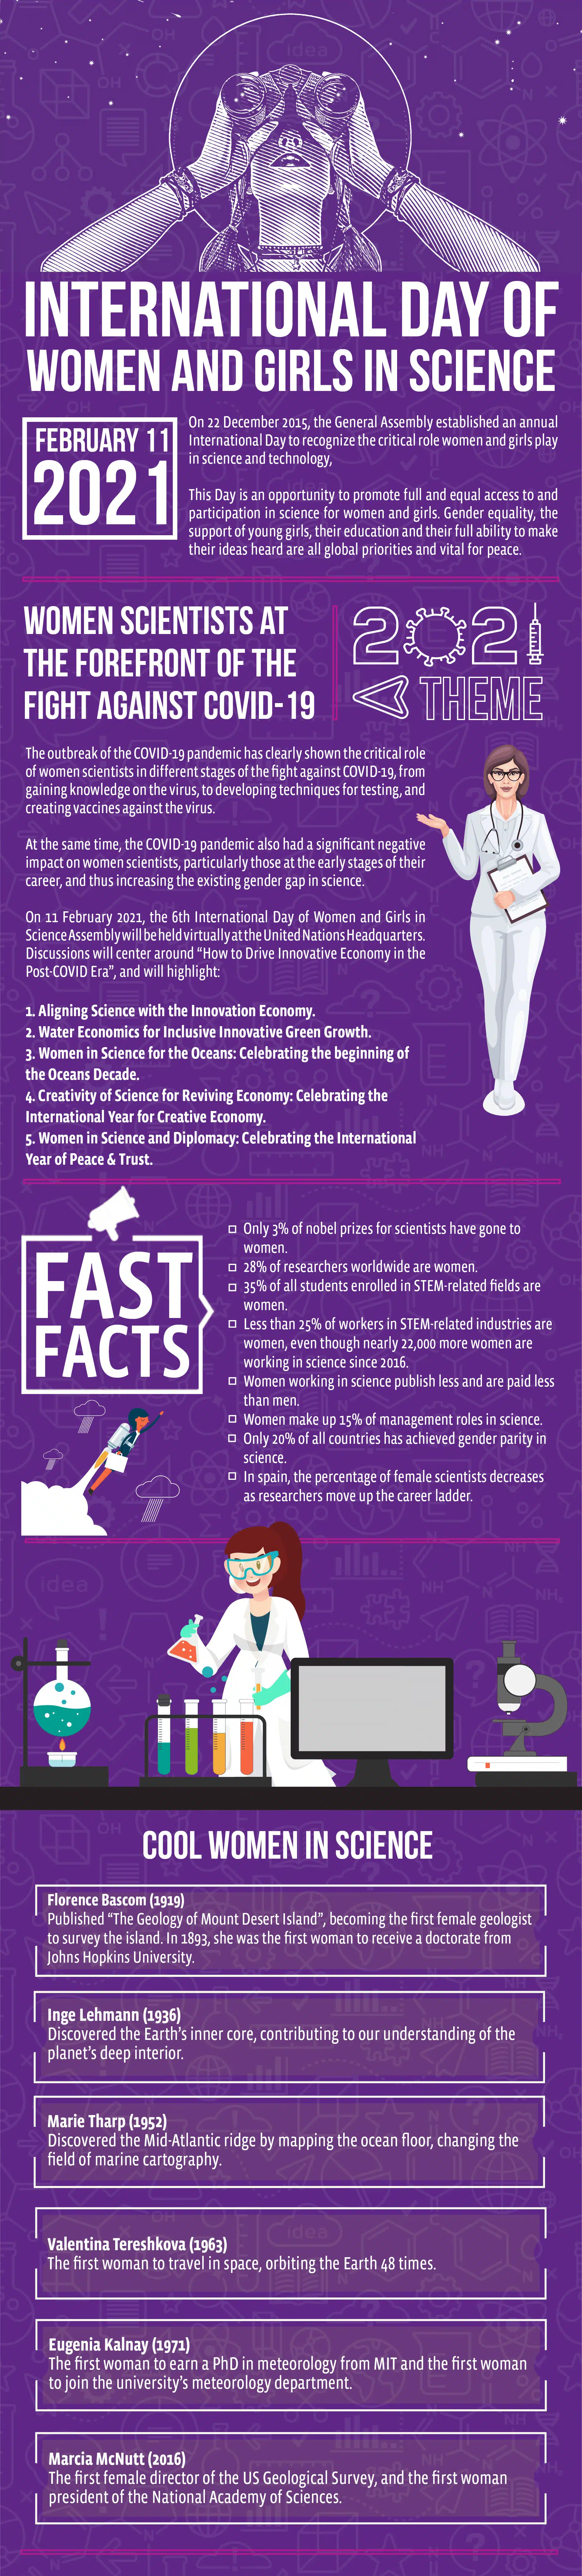 International Day of Women and Girls in Science infographic by University of the People